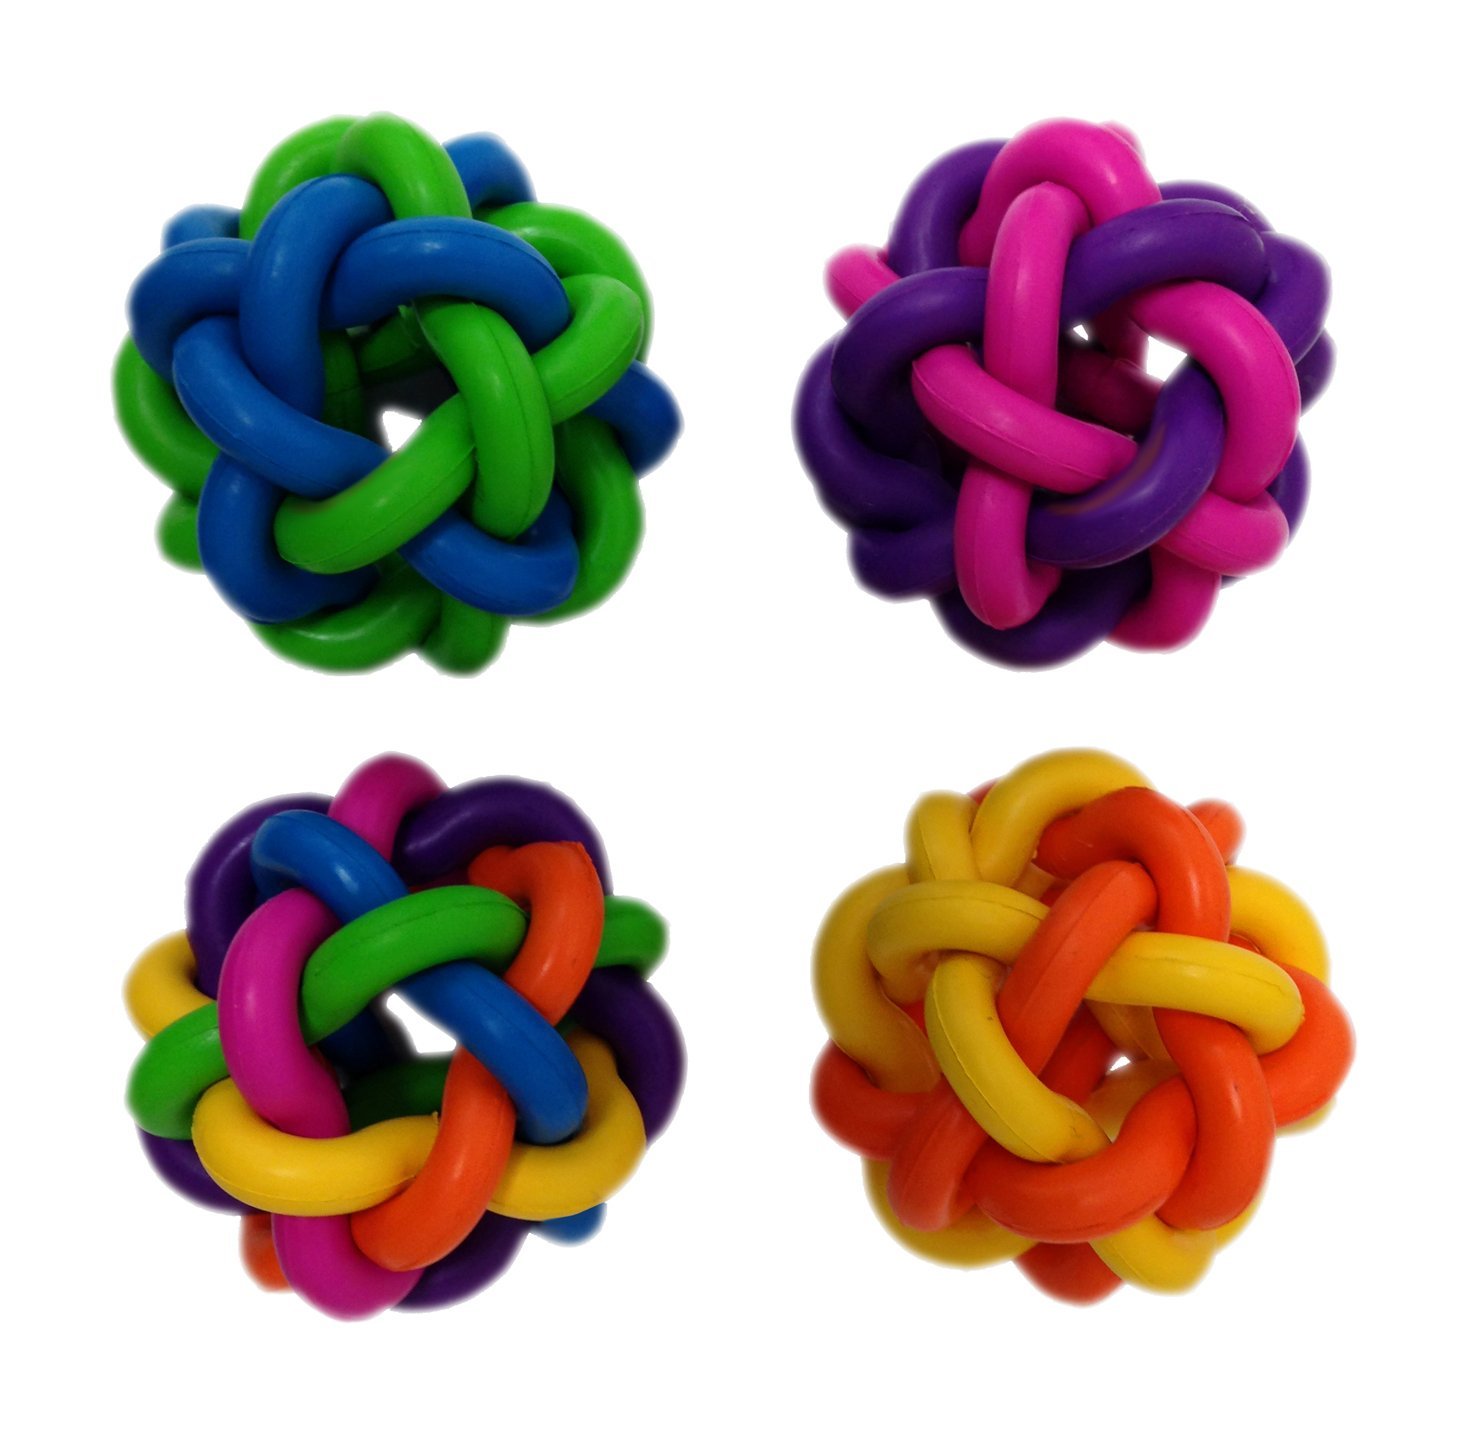 Colorful Knit Pet Ball Toy